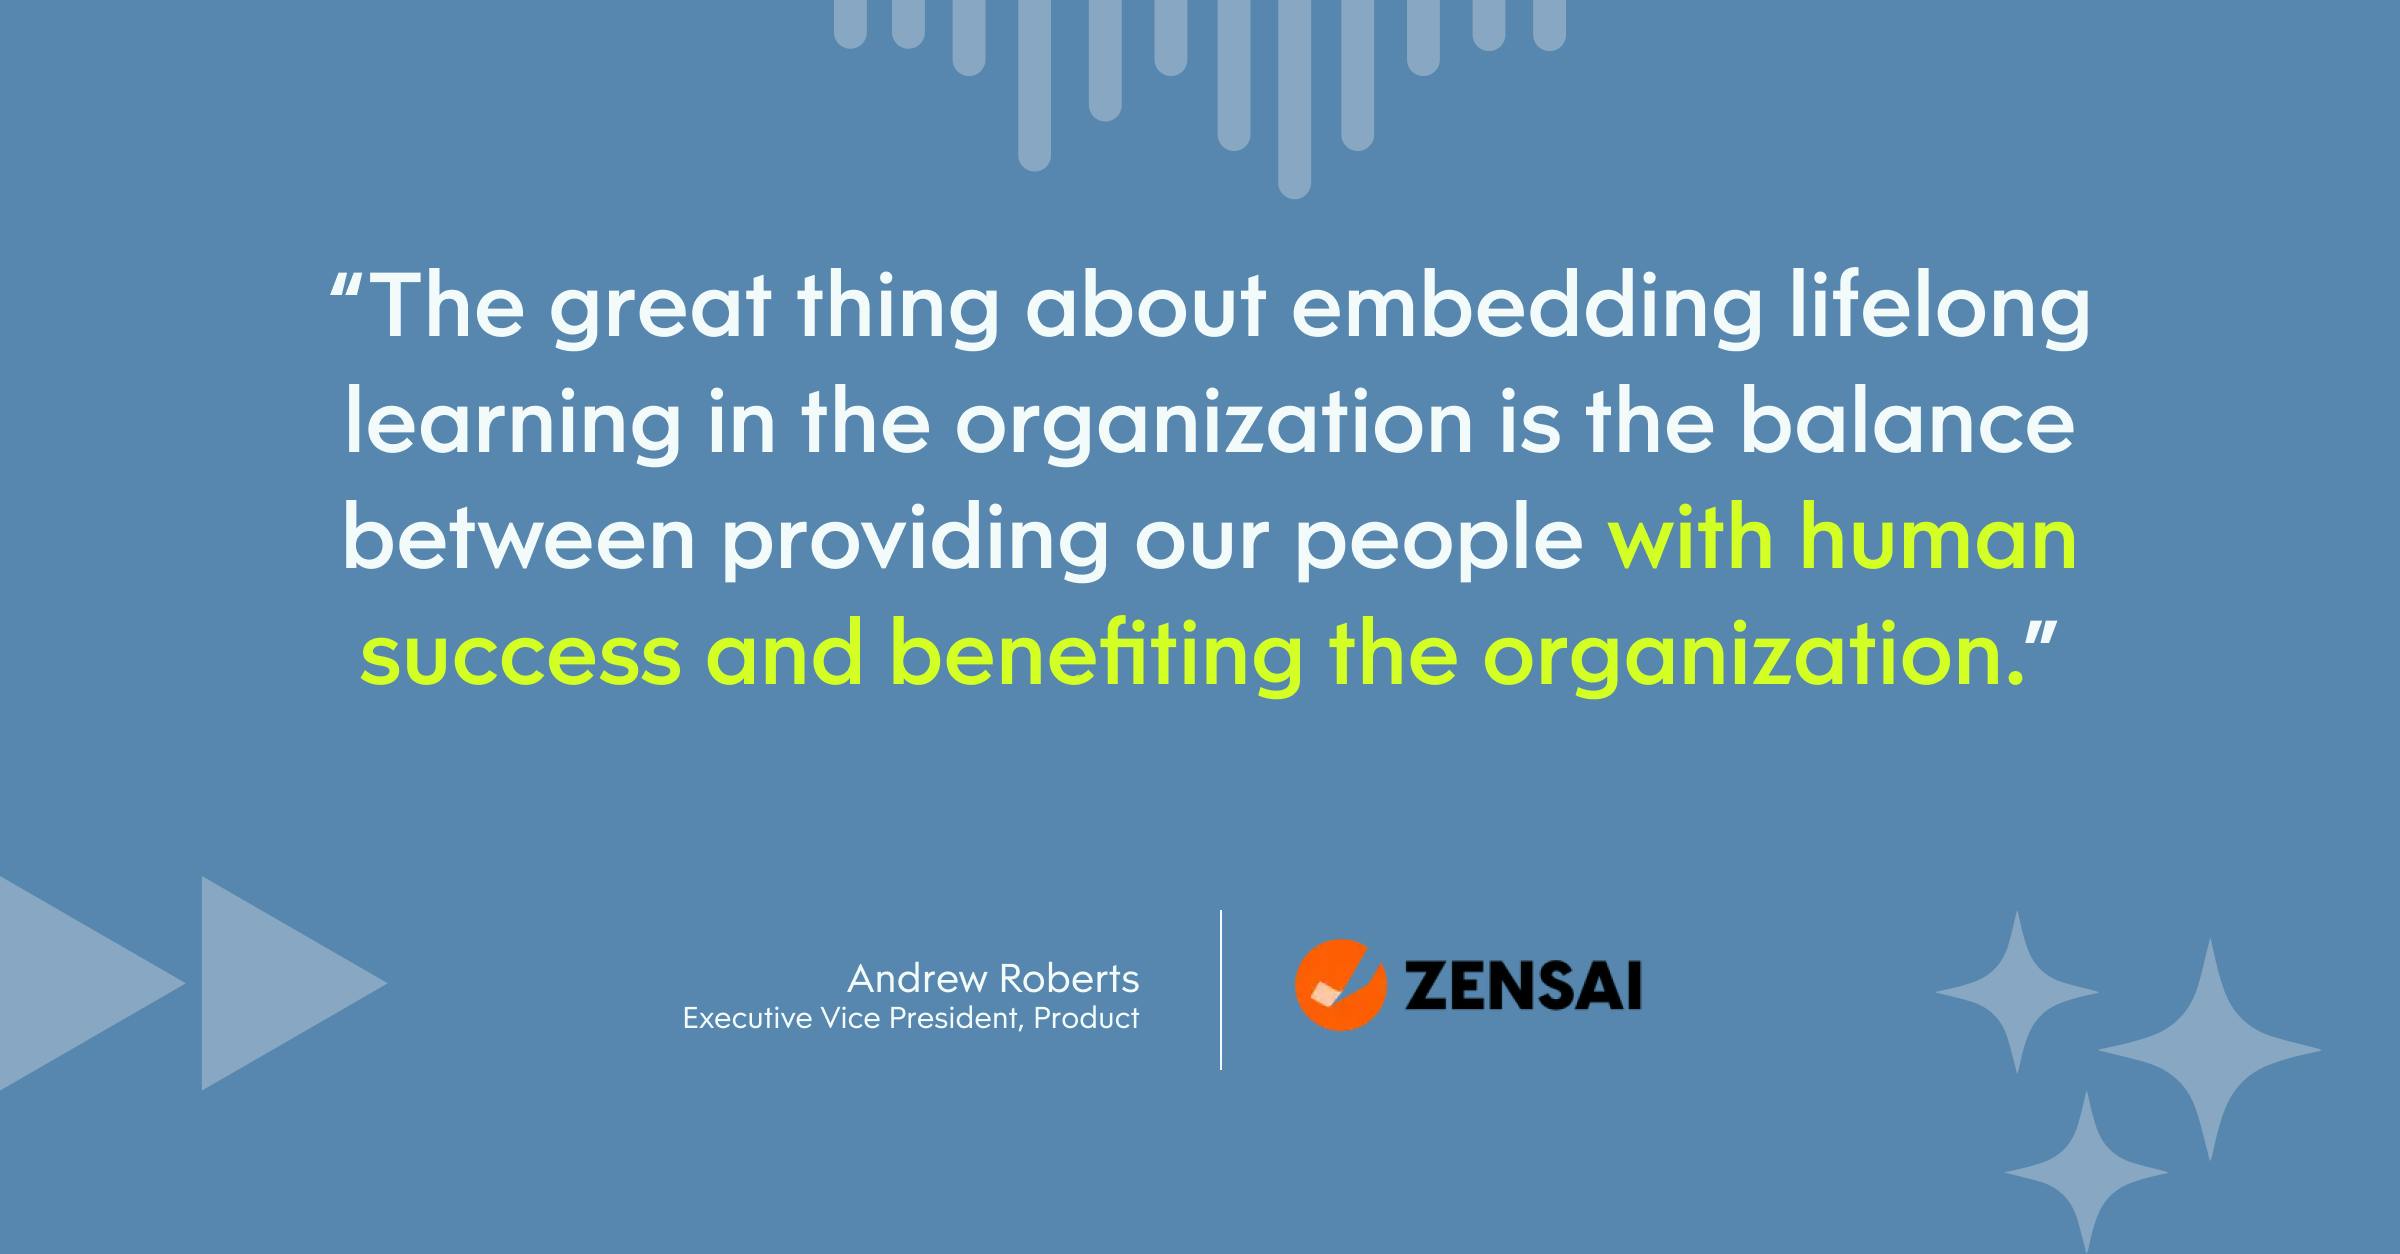 “The great thing about embedding lifelong learning in the organization is the balance between providing our people with human success and benefiting the organization.”